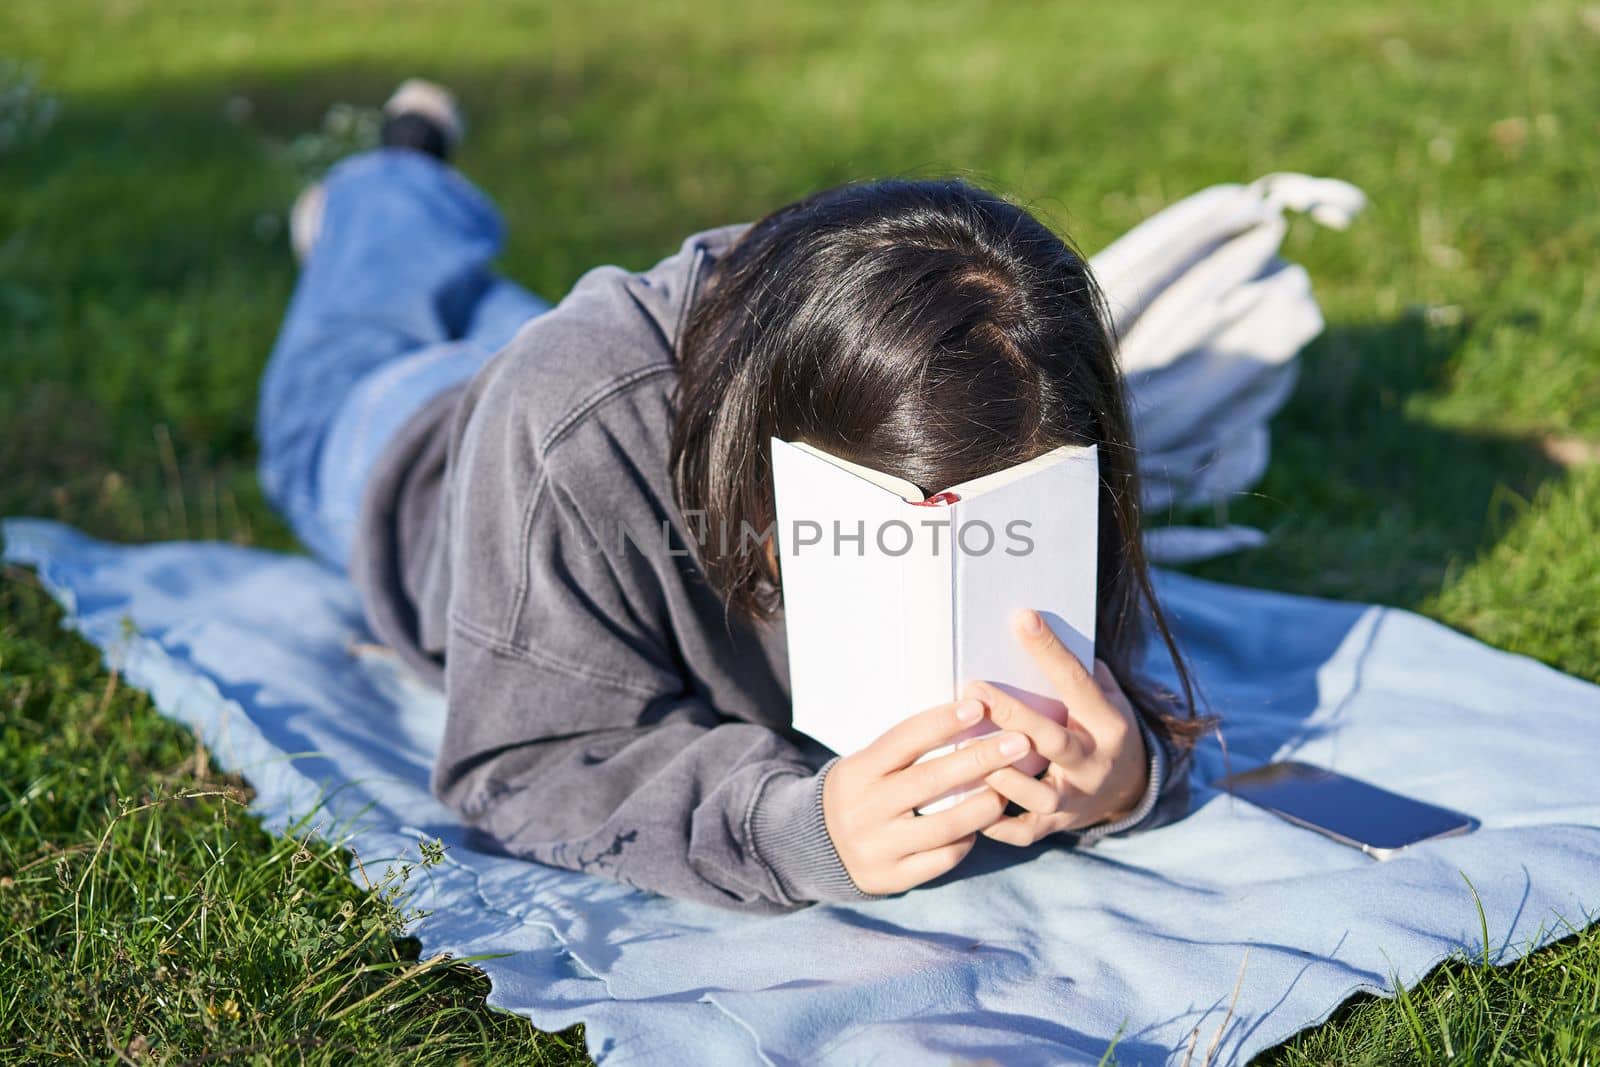 Portrait of happy girl laughing, covering face with her book, lying on grass in park. Copy space